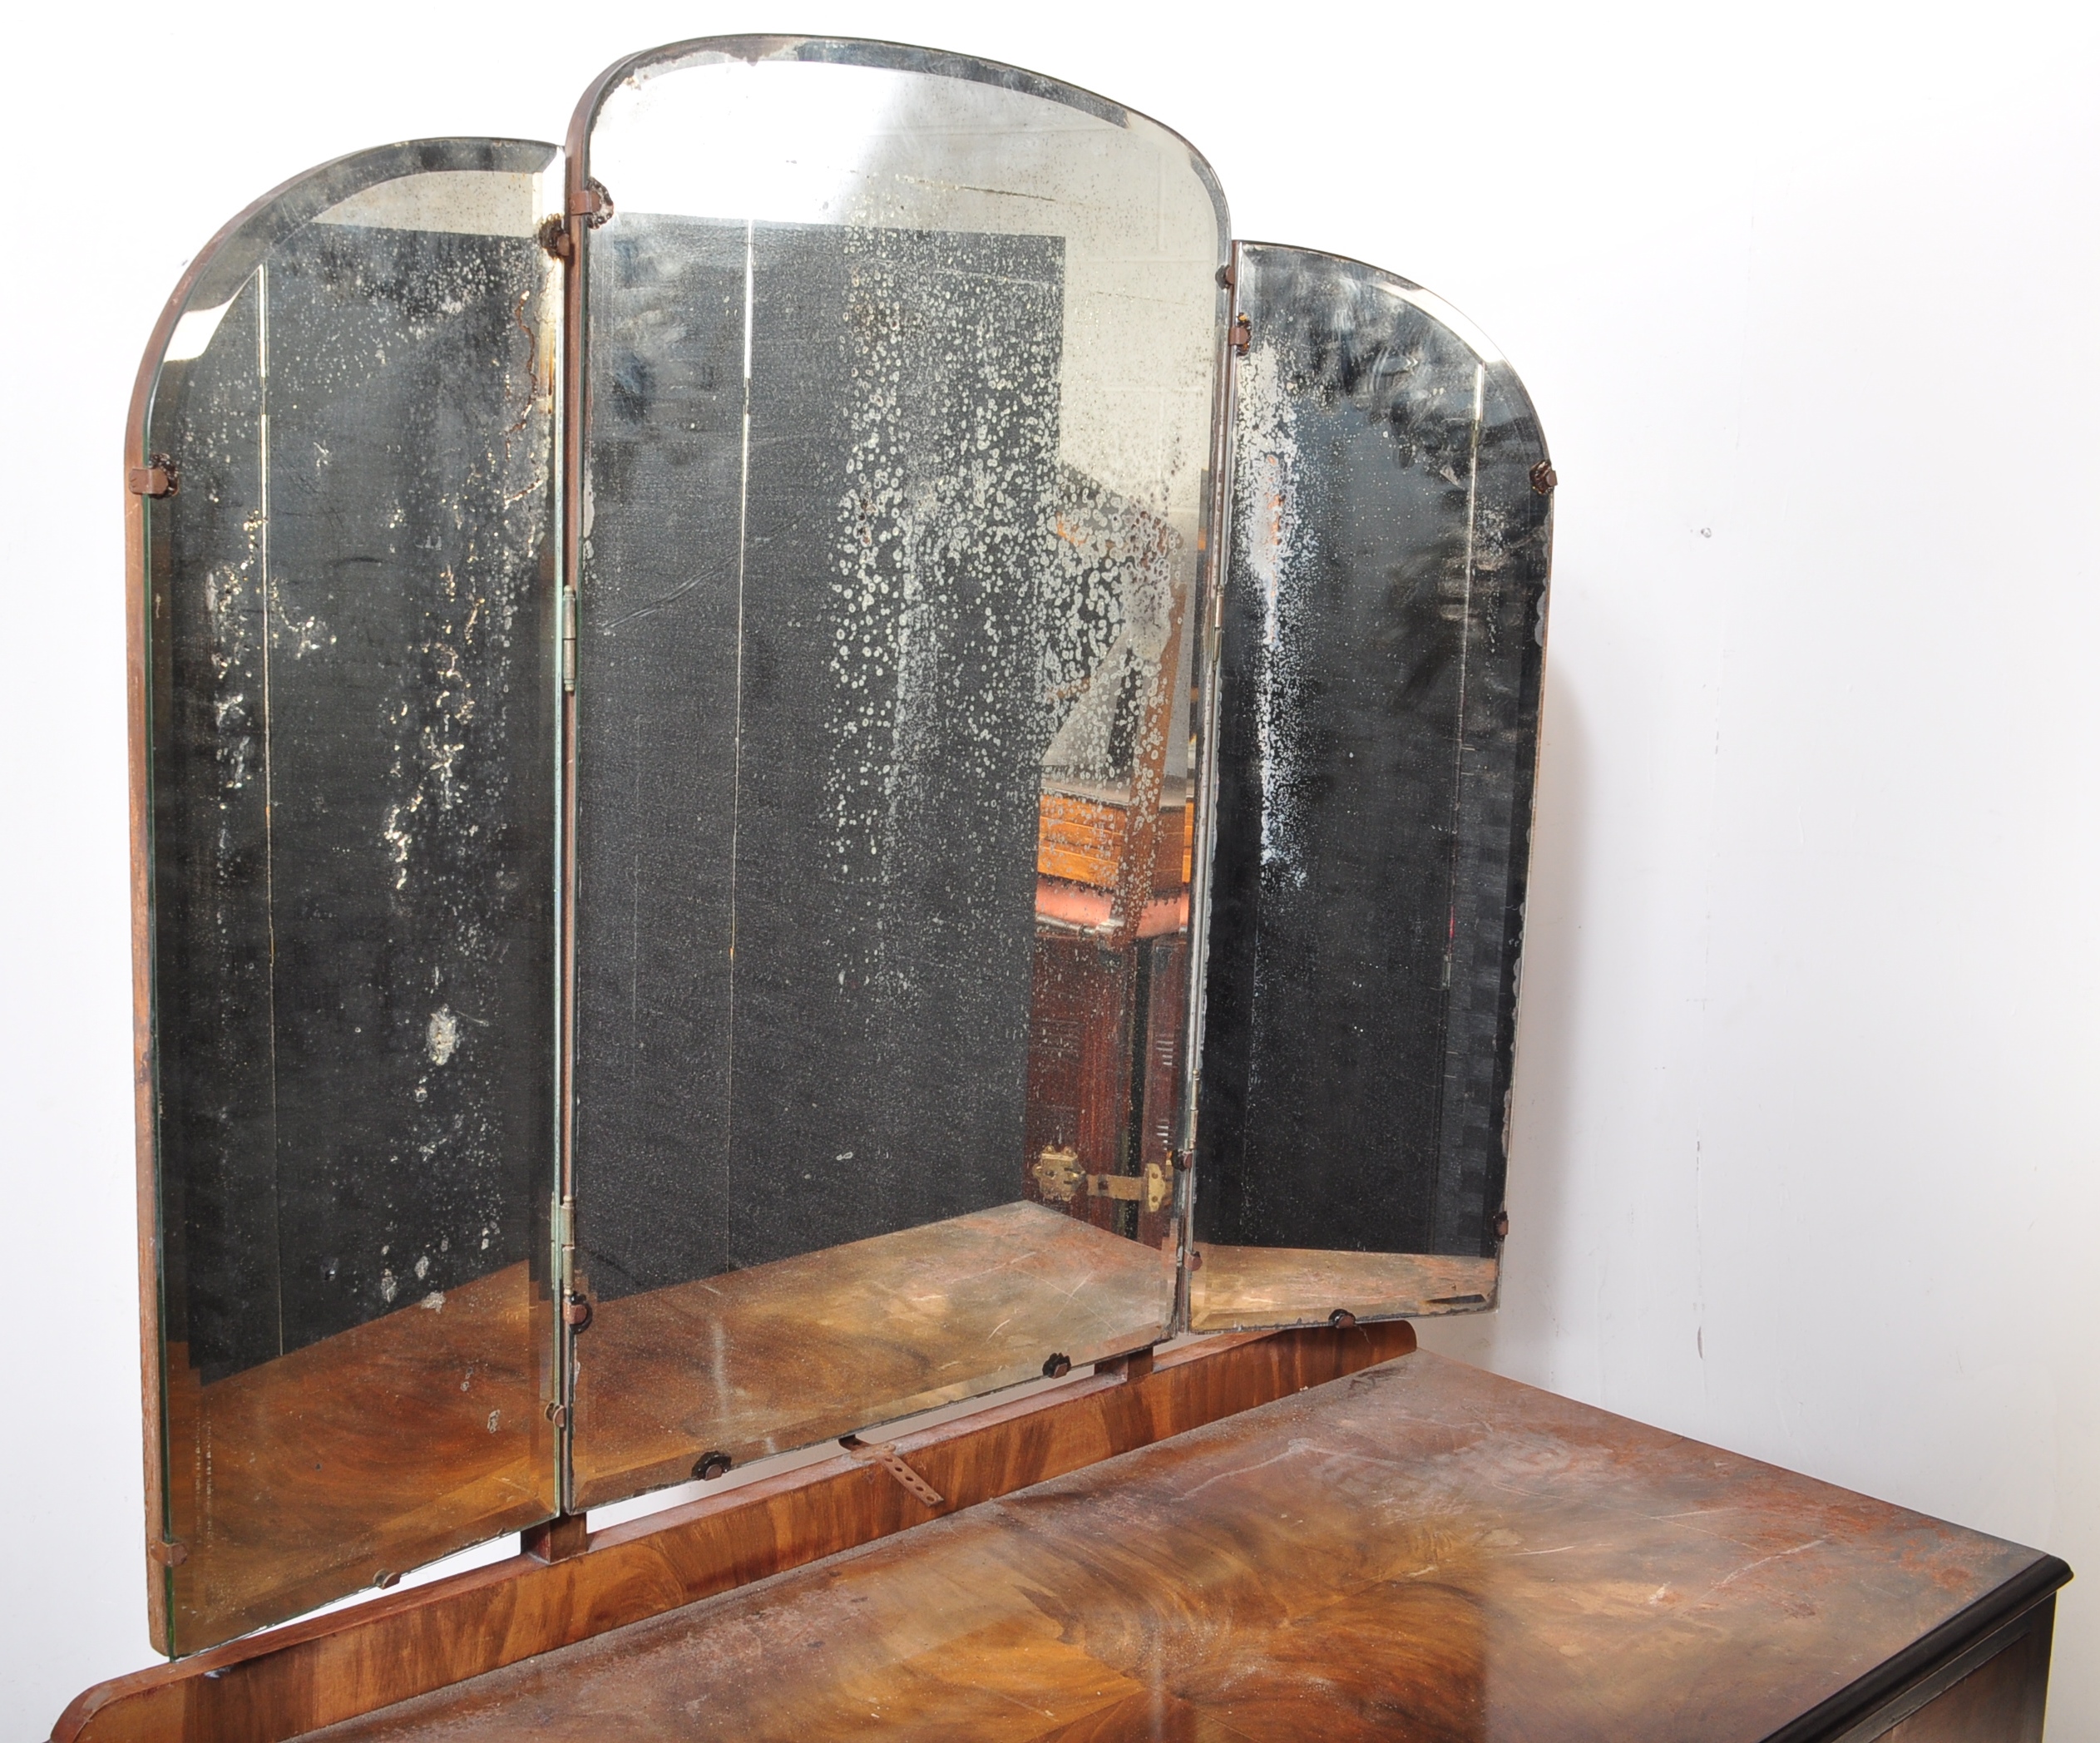 1940S WALNUT QUEEN ANNE REVIVAL LADIES DRESSING TABLE - Image 3 of 8